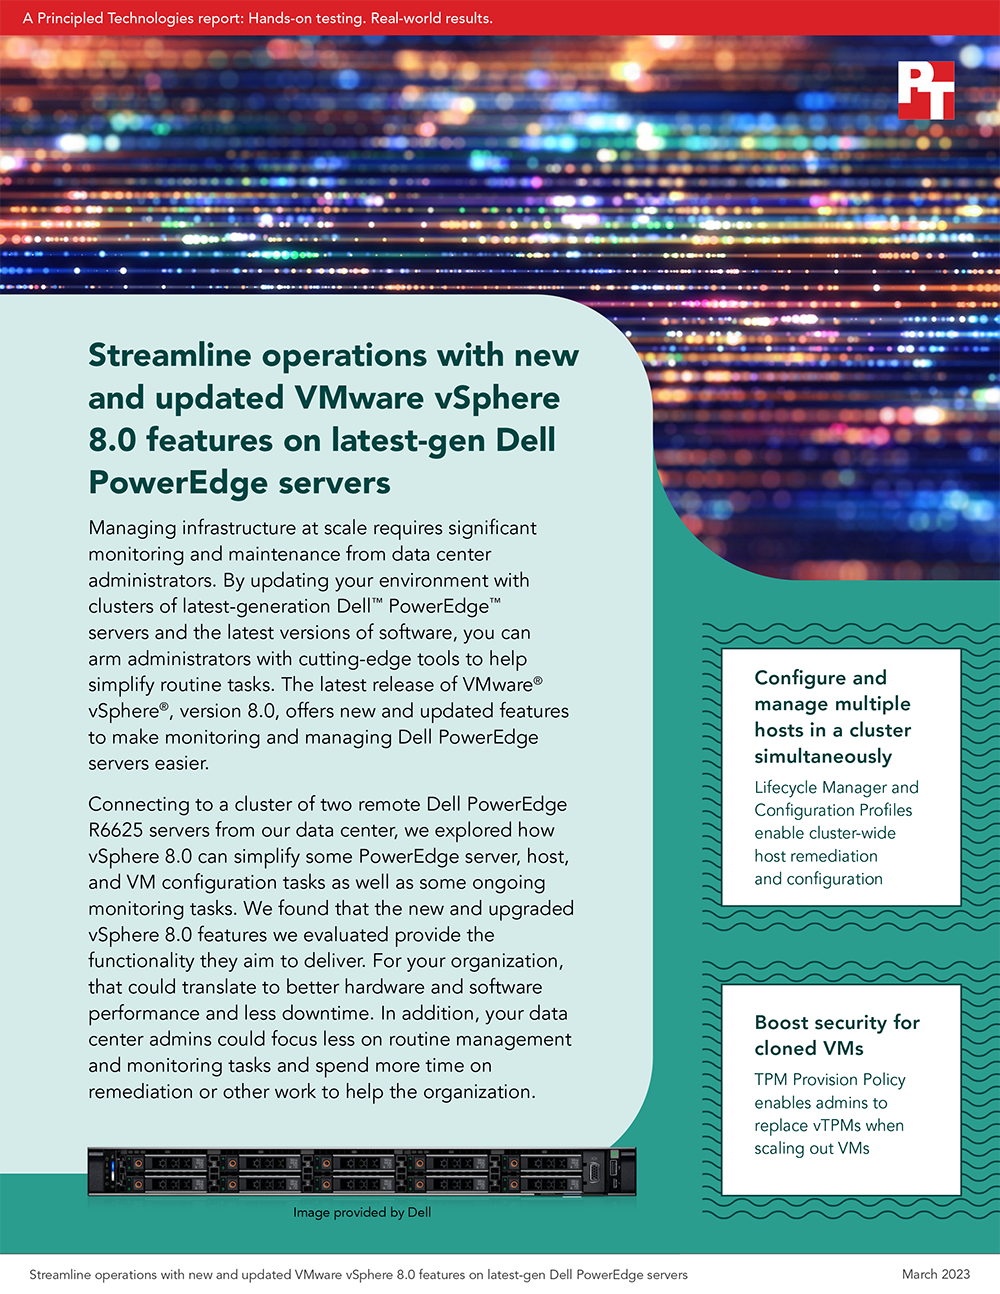 Principled Technologies Sees Management and Monitoring Benefits When Upgrading to Latest-Gen Dell PowerEdge Servers with VMware vSphere 8.0